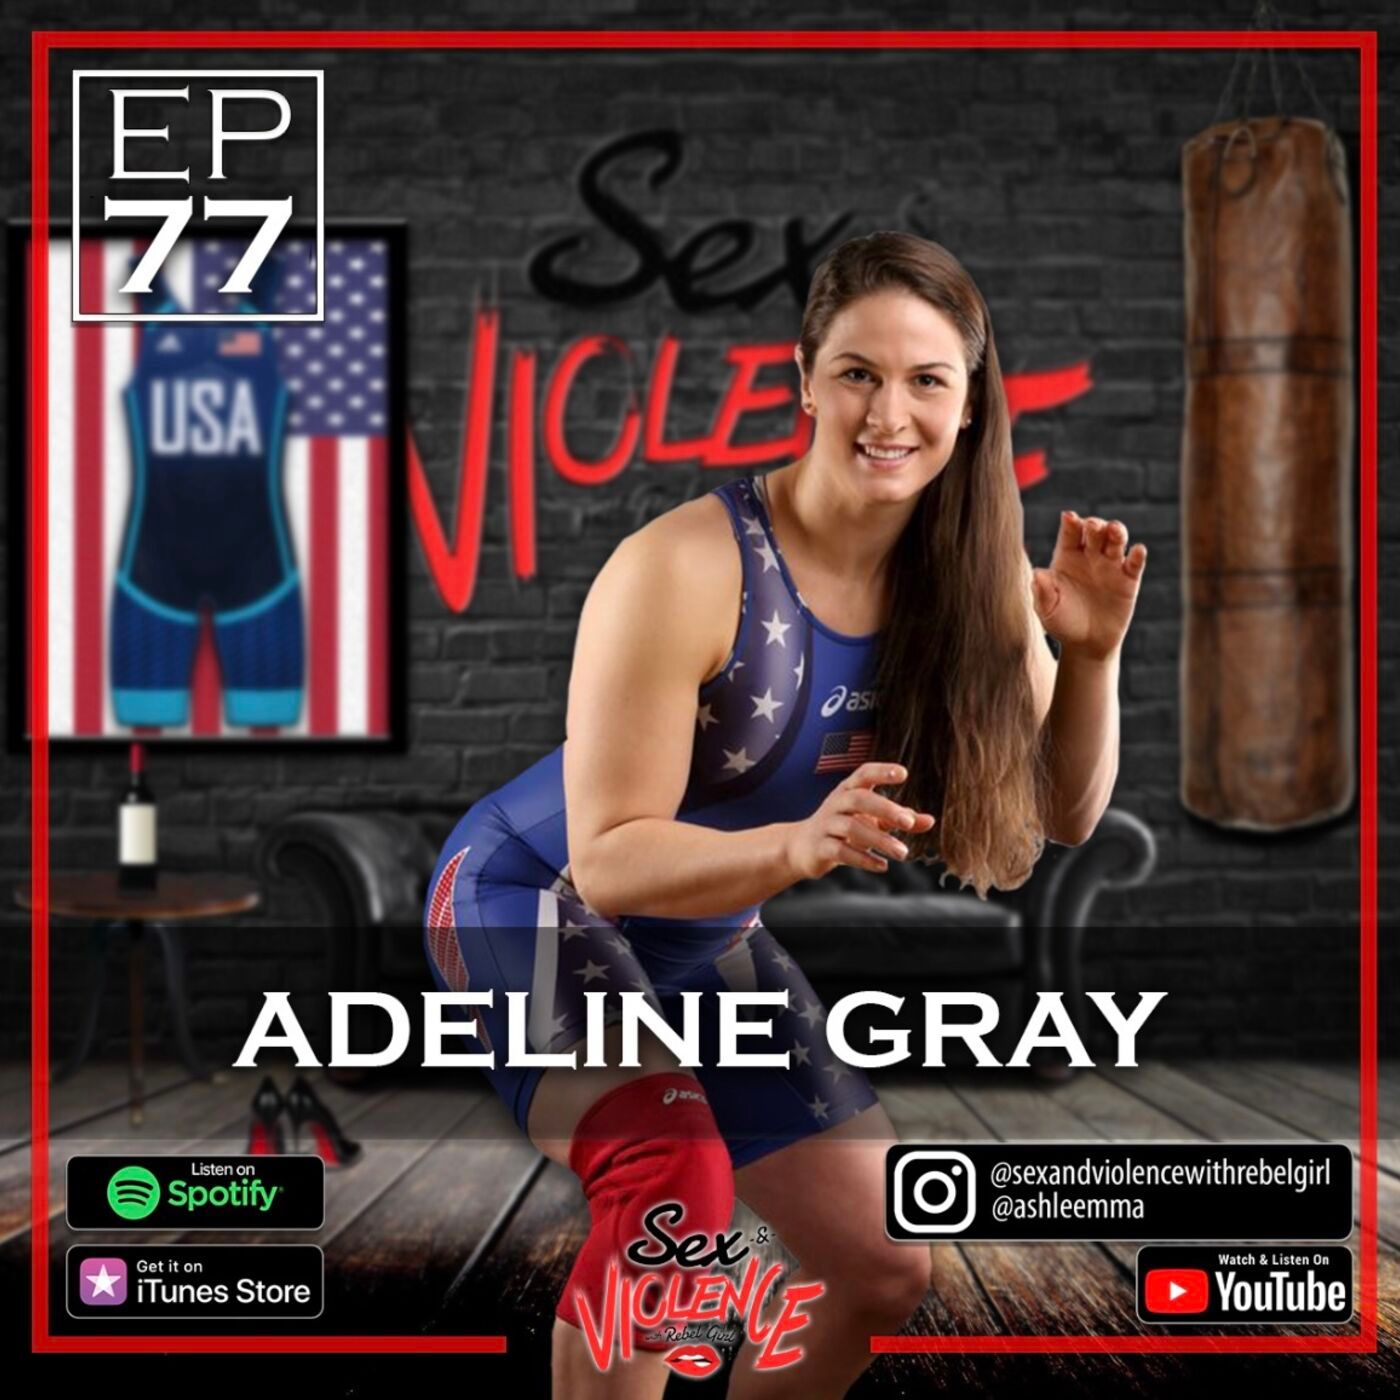 Ep.77 Adeline Gray - Sex And Violence With Rebel Girl image picture